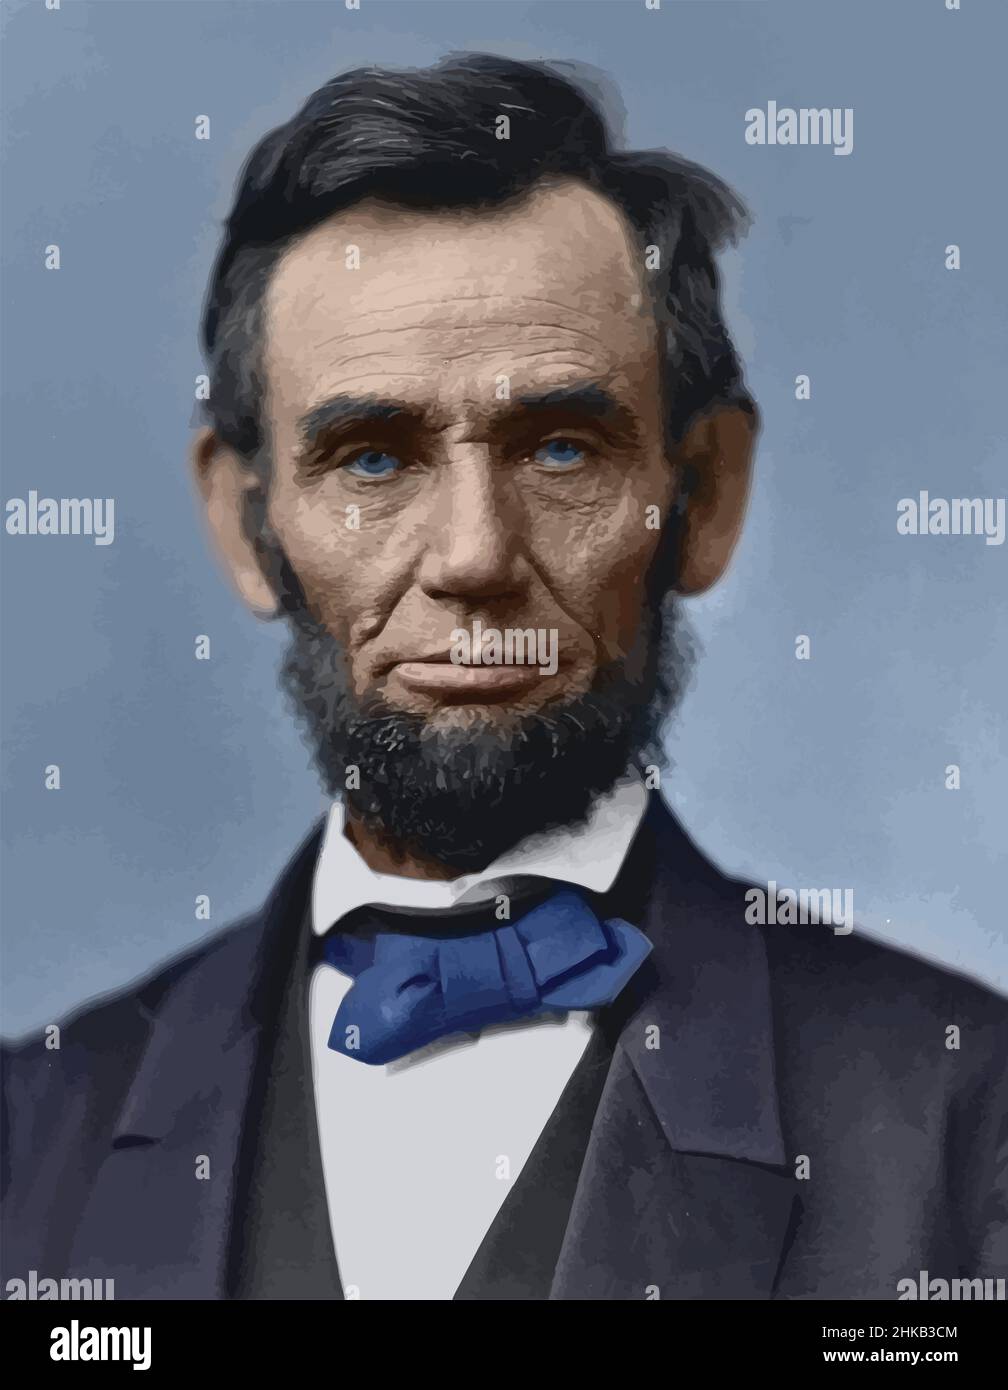 Portrait photo of President Abraham Lincoln from 1863 manually colored. Was an American politician who led the United States during the Civil War.. Stock Vector